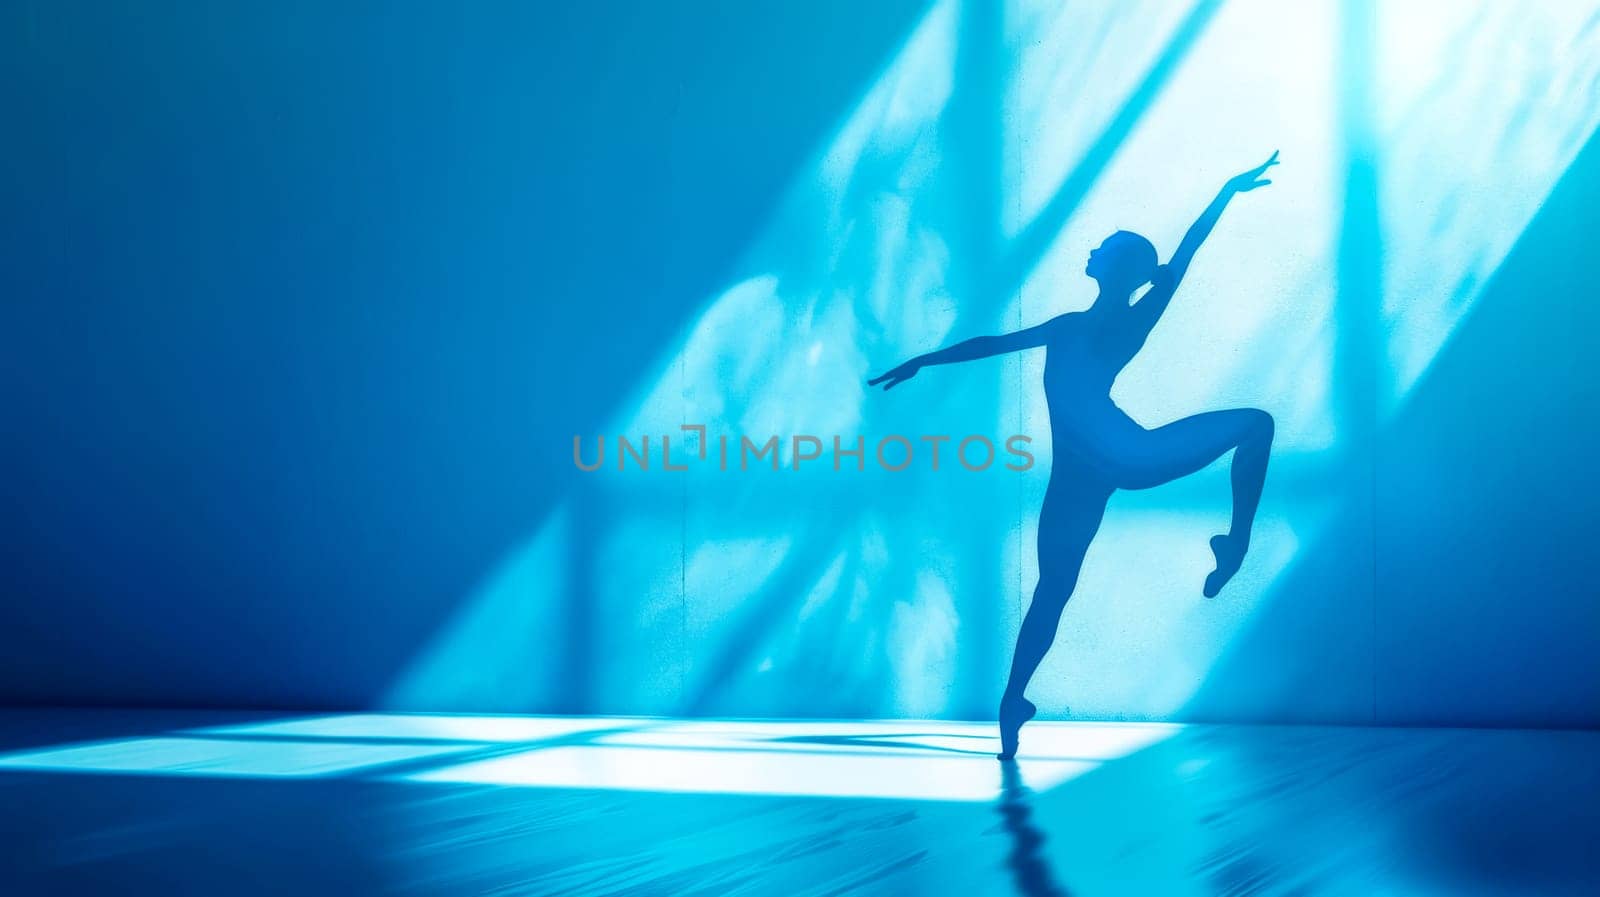 Graceful silhouette of a ballerina in blue light by Edophoto